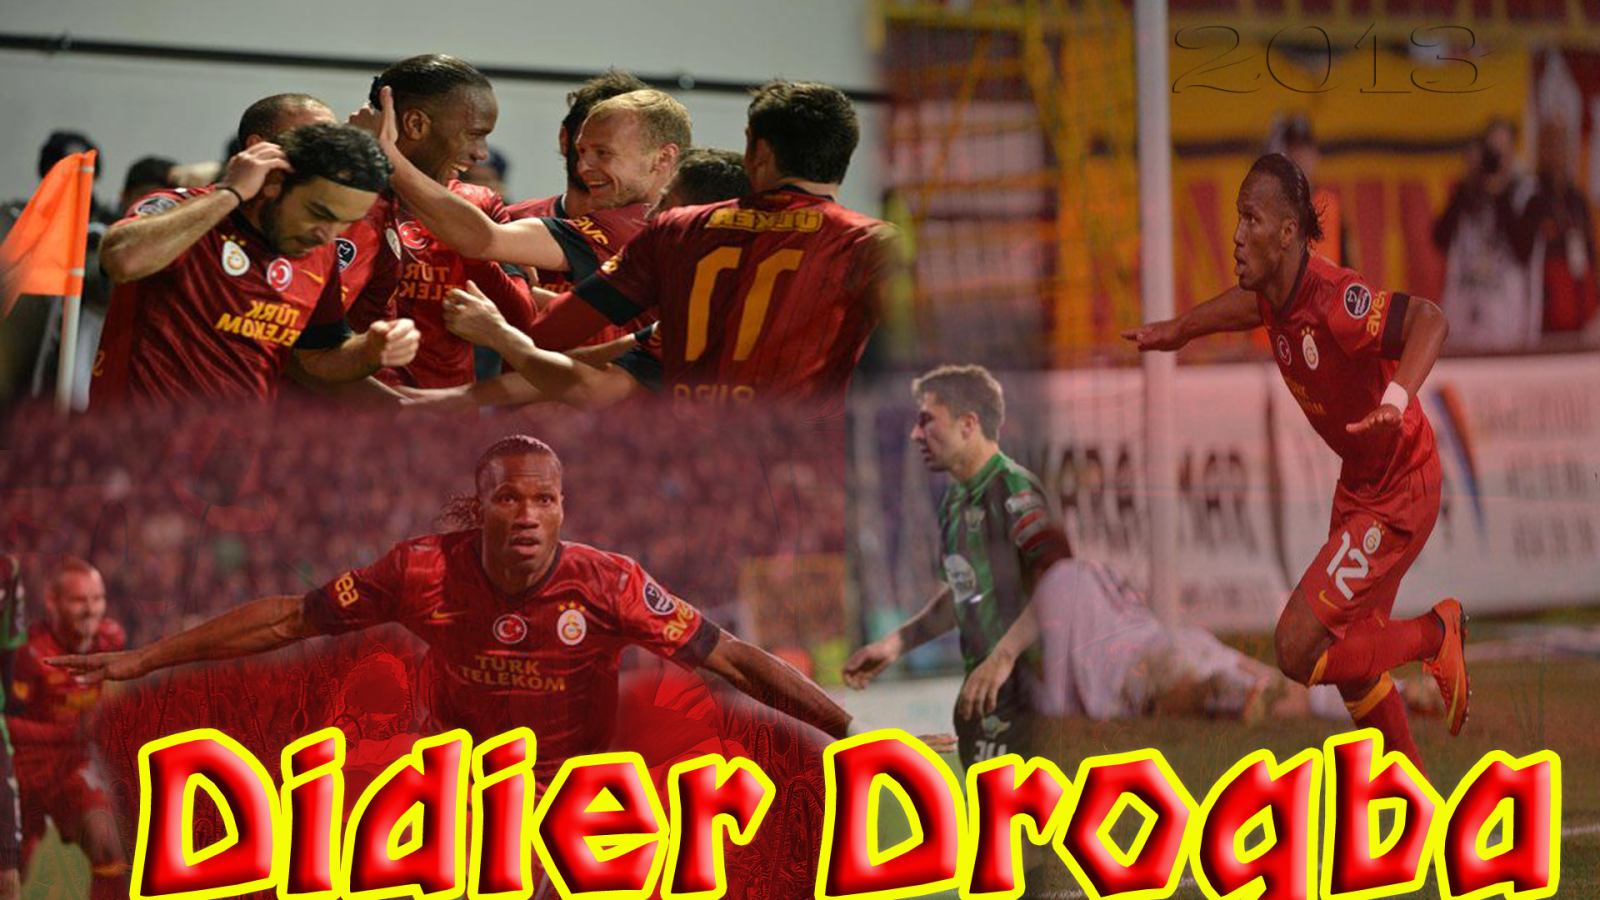 The forward of Galatasaray Didier Drogba best moments